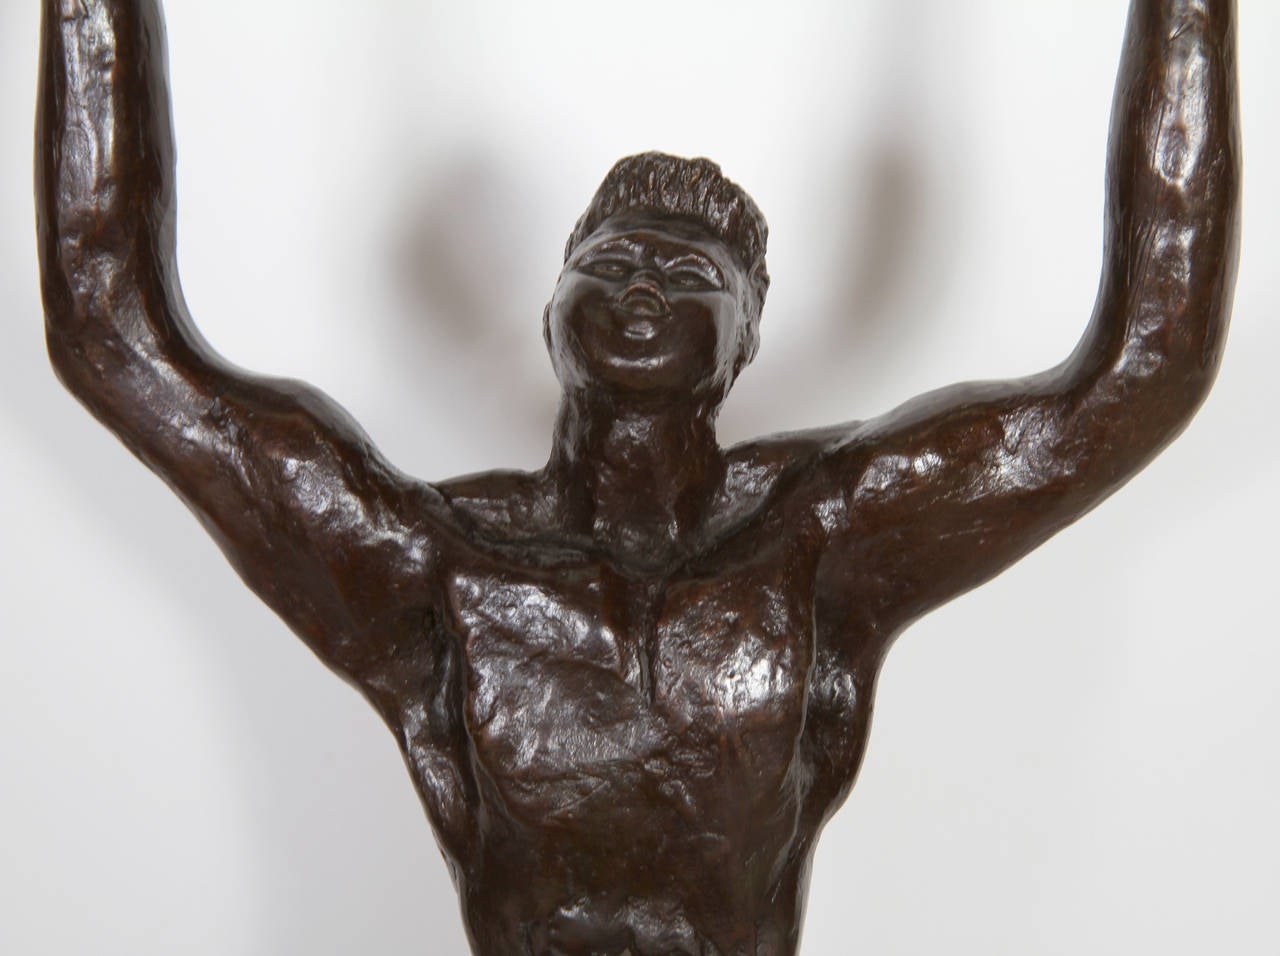 Artist: Jesse Richardson, American
Title: Muhammad Ali, The Champ
Year: circa 1970
Medium: Bronze Sculpture, Signature and number inscribed
Edition: 4/40
Size: 30 in. x 8 in. x 3 in. (76.2 cm x 20.32 cm x 7.62 cm)